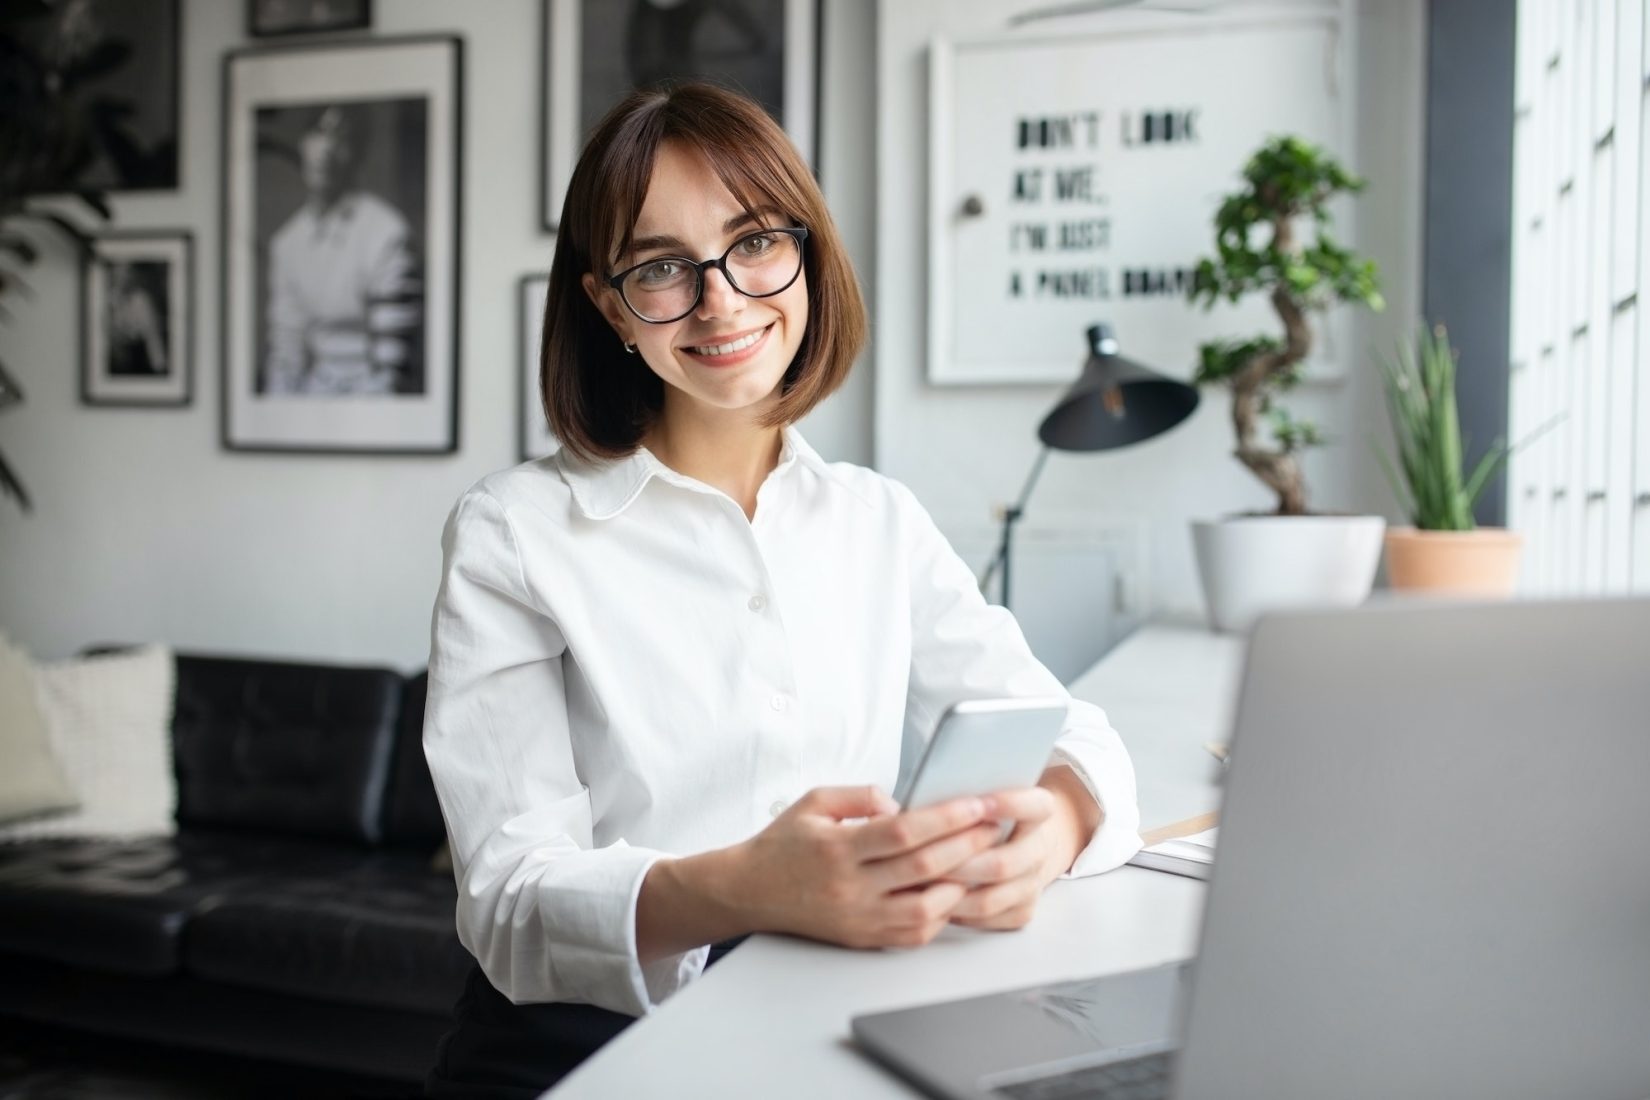 Cheerful smiling freelance lady using cellphone sitting in front of laptop, working in coworking